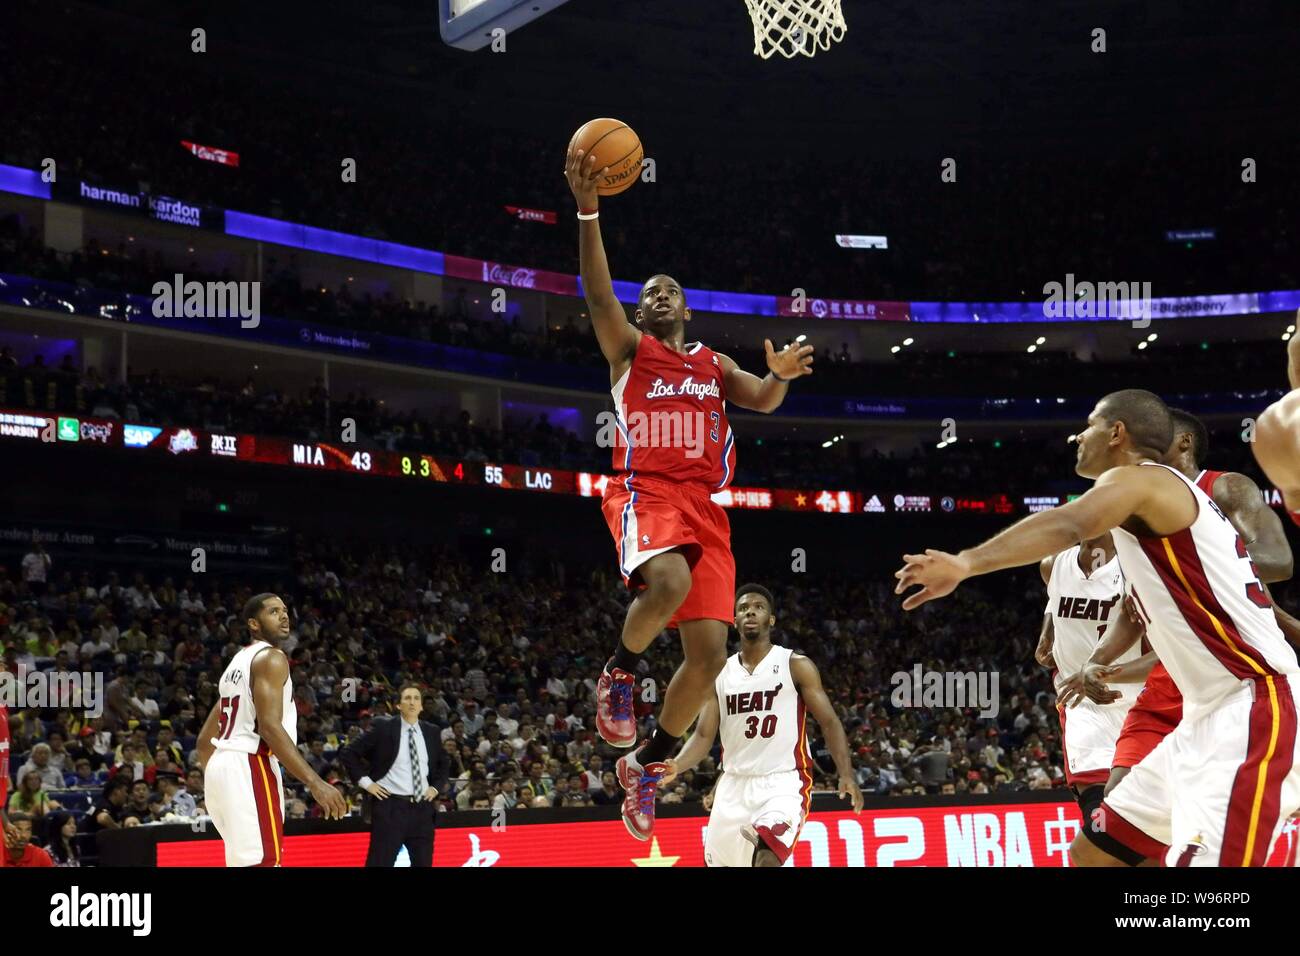 Chris Paul of the Los Angeles Clippers, top, jumps to score against the Miami Heat during their second match of their NBA China Games in Shanghai, Chi Stock Photo